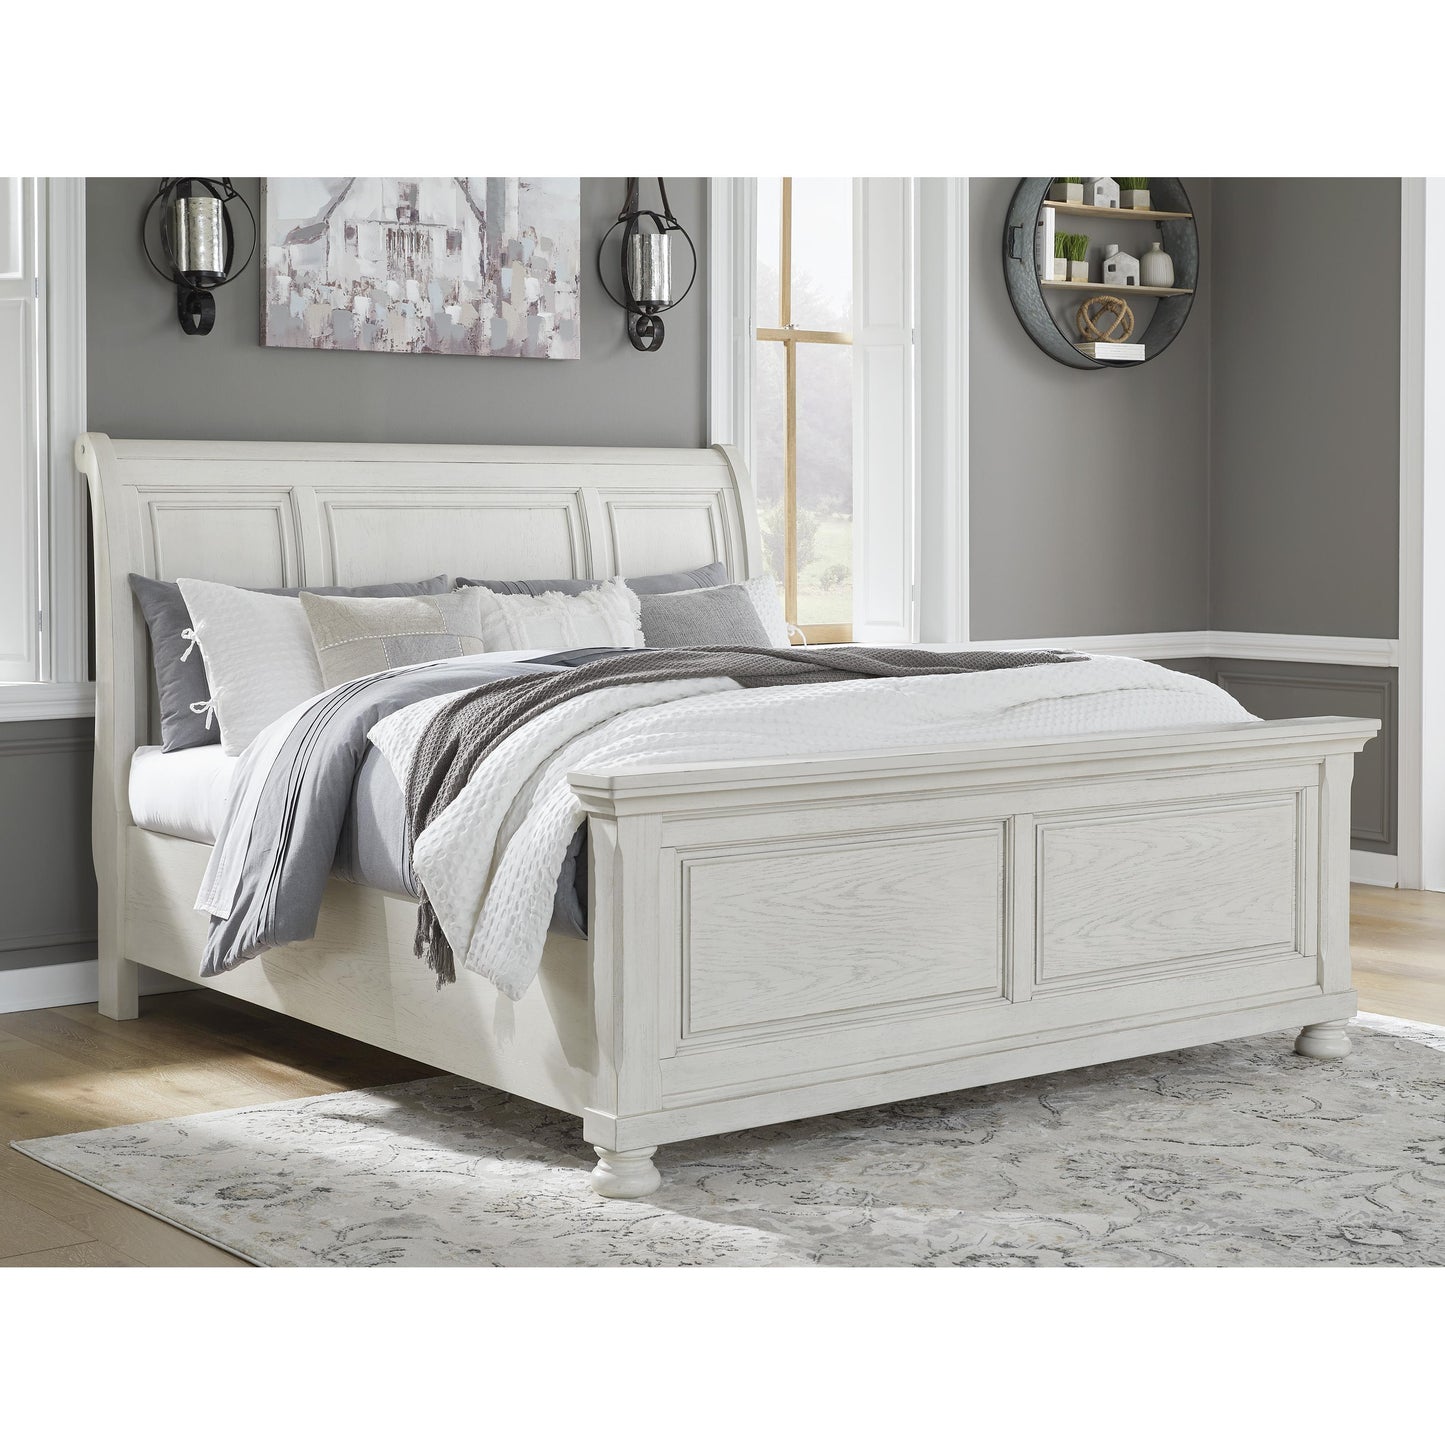 Signature Design by Ashley Robbinsdale Queen Sleigh Bed B742-77/B742-54/B742-96 IMAGE 4